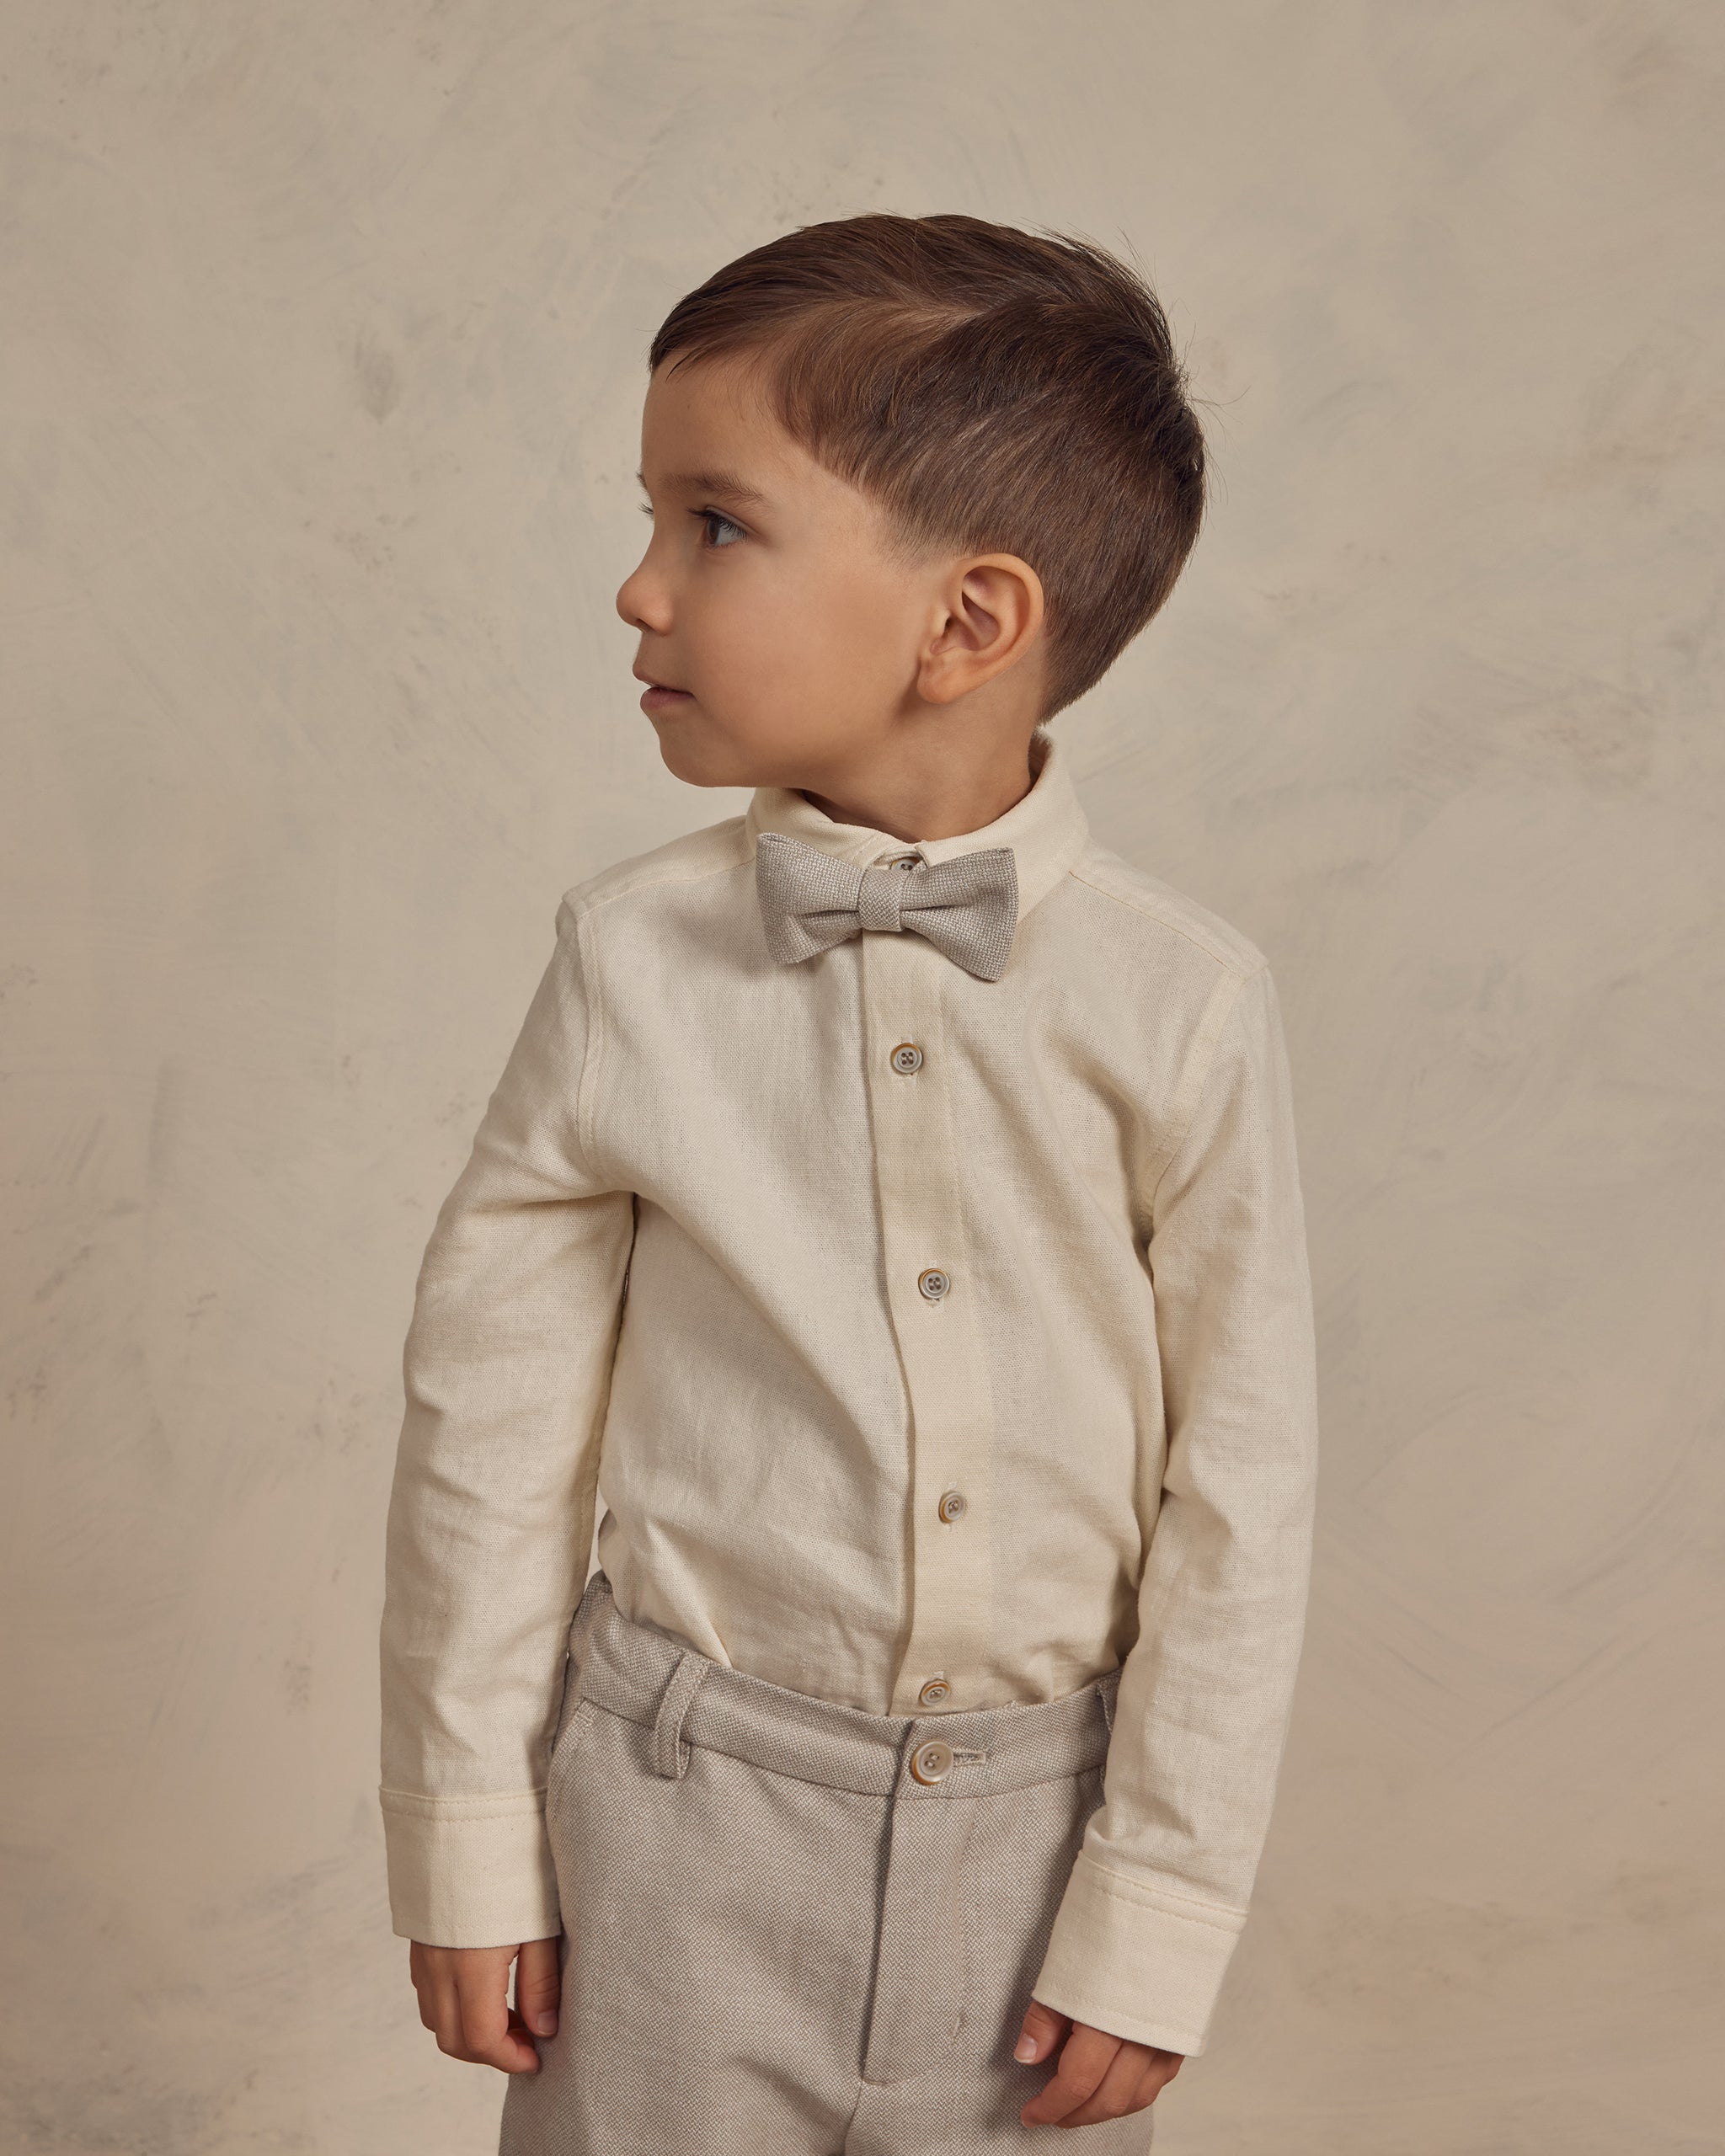 Harrison Button Down || Natural - Rylee + Cru | Kids Clothes | Trendy Baby Clothes | Modern Infant Outfits |